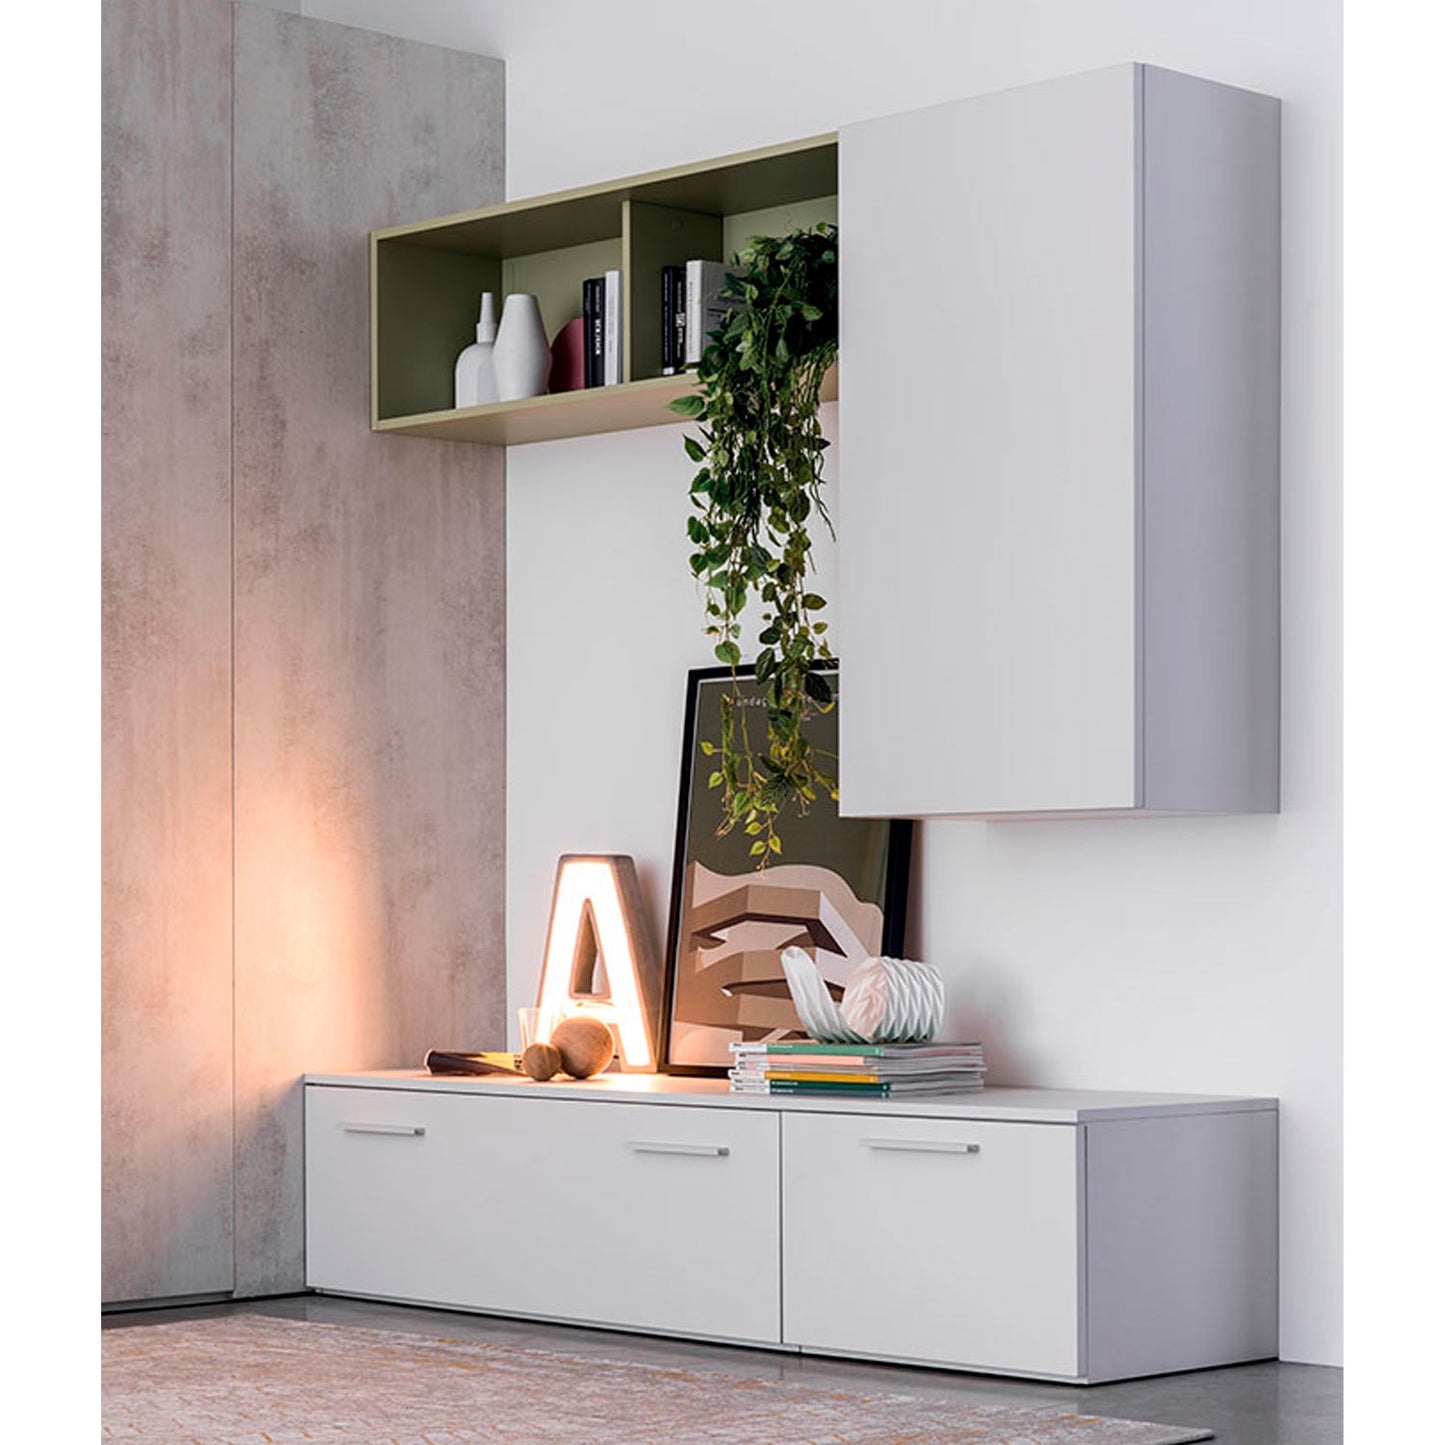 IM20-03 Studio Bedroom Set with Foldaway Bed by Clever